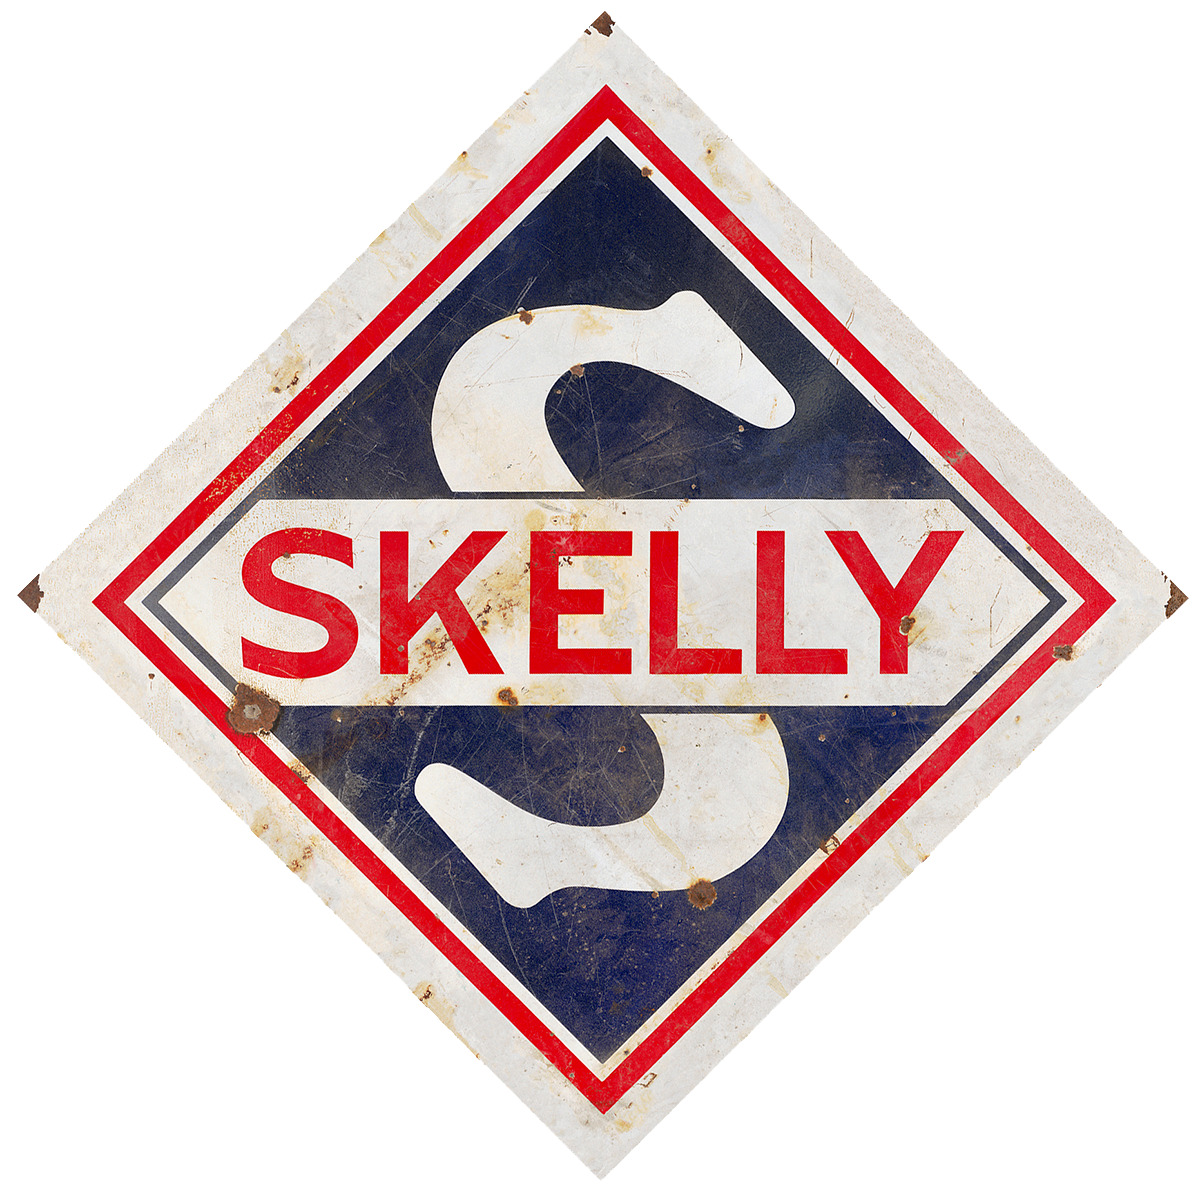 SKELLY OIL COMPANY ADVERTISING METAL SIGN